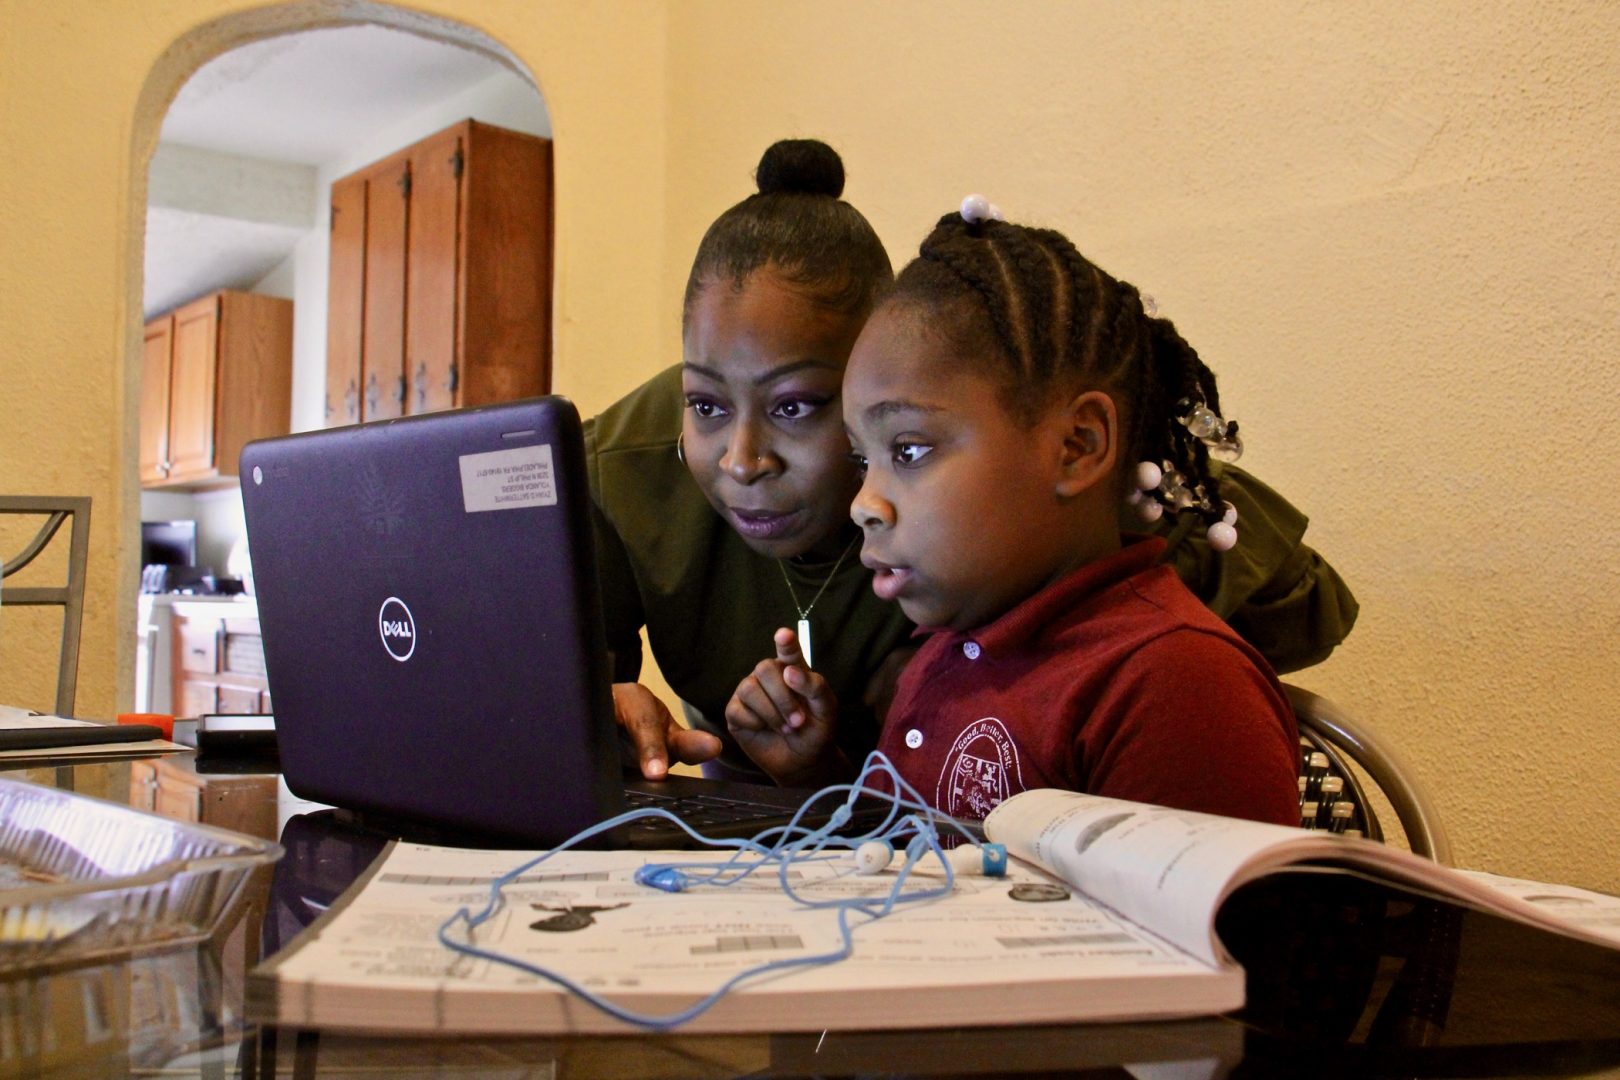 Yolanda Biggers helps her daughter, Zyiah Satterwhite, 7, find her assignment. Zyiah attends second grade virtually from her home in Fairhill.